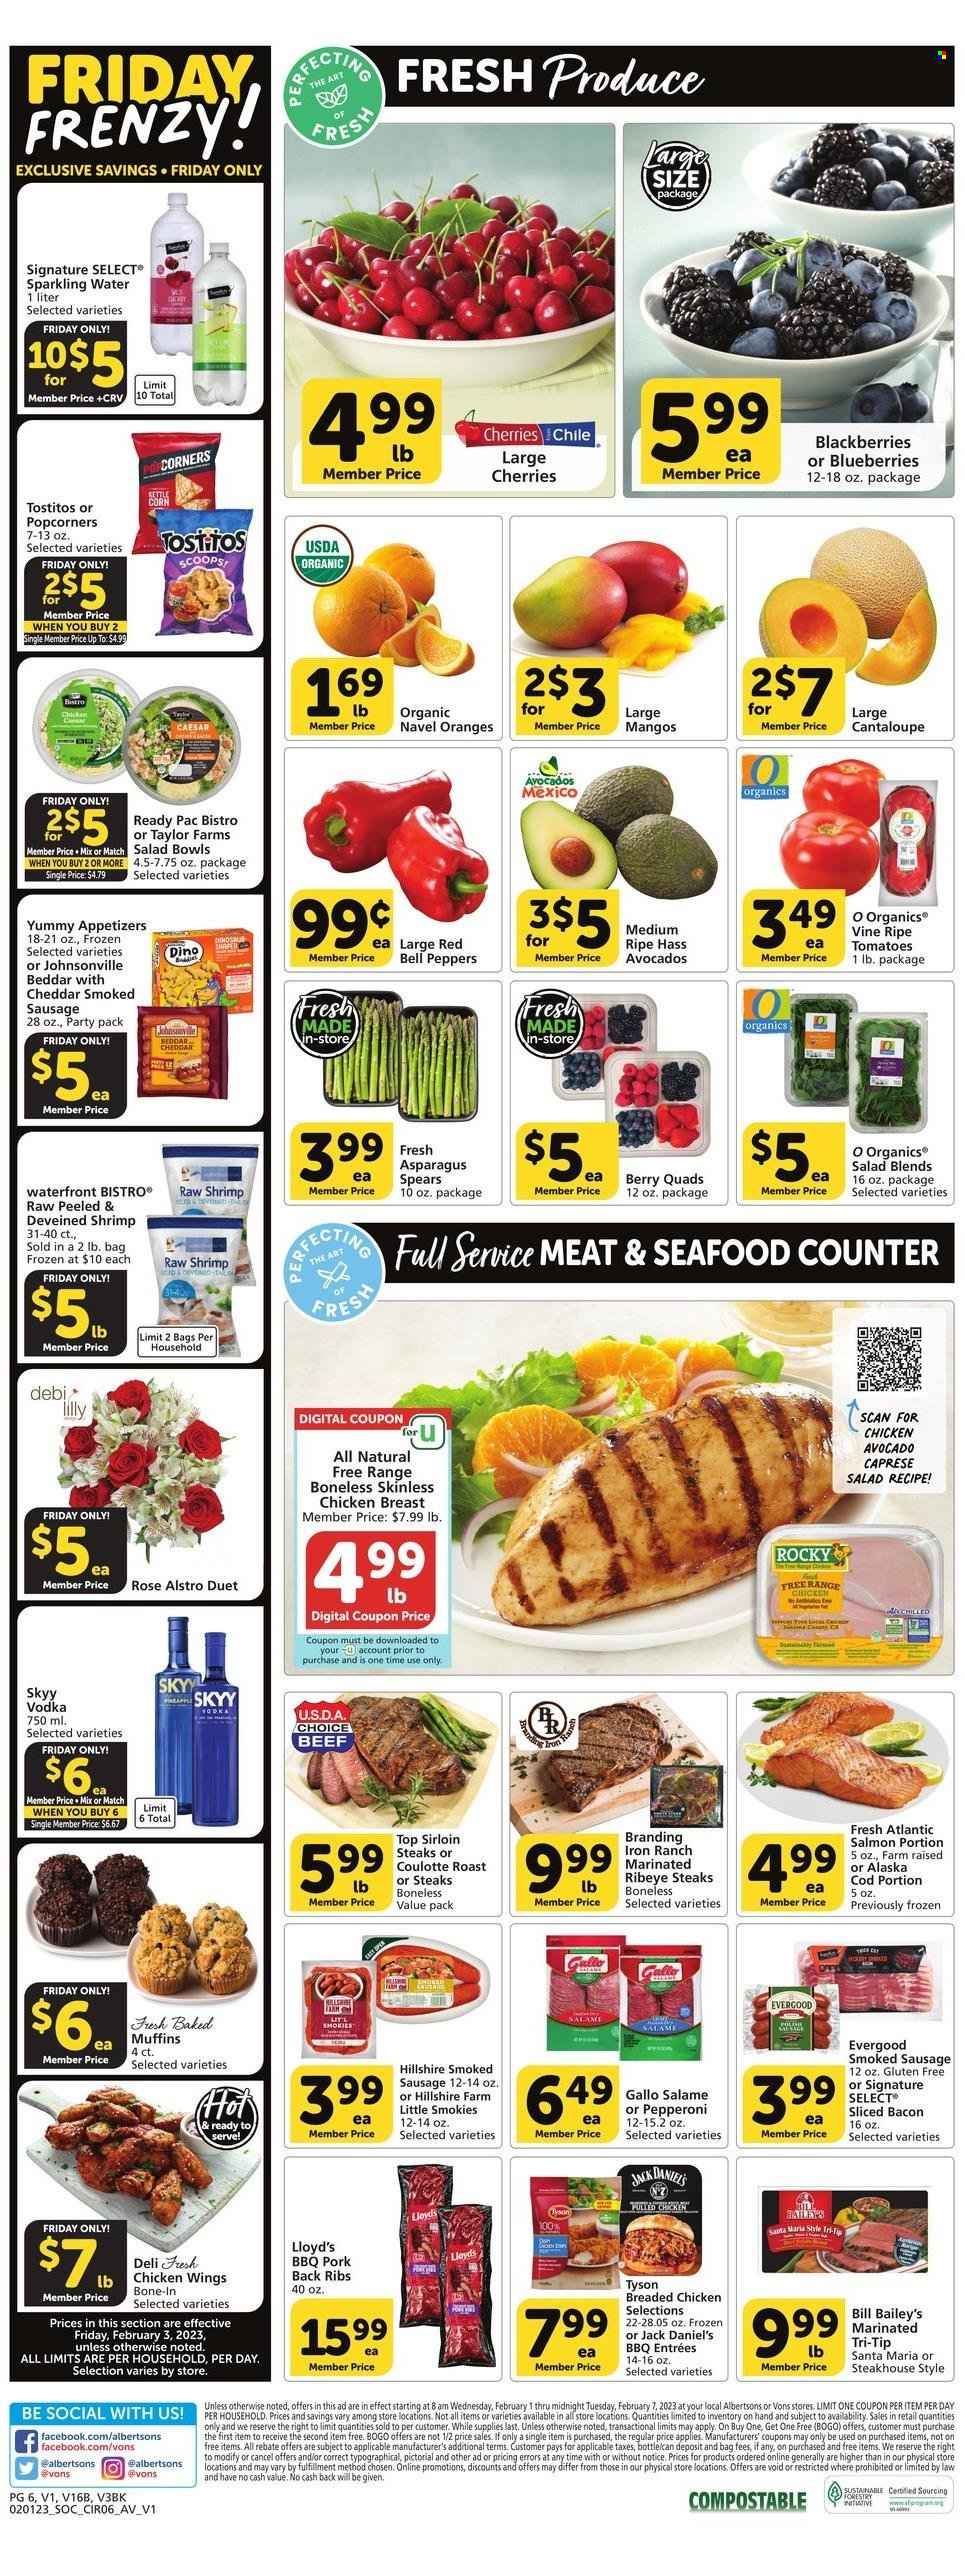 thumbnail - Vons Flyer - 02/01/2023 - 02/07/2023 - Sales products - muffin, cantaloupe, tomatoes, avocado, blackberries, blueberries, cherries, oranges, chicken wings, beef meat, steak, sirloin steak, ribeye steak, ribs, Johnsonville, pork meat, pork ribs, pork back ribs, cod, salmon, seafood, shrimps, Jack Daniel's, fried chicken, Ready Pac, bacon, salami, Hillshire Farm, sausage, smoked sausage, cheese, popcorn, Tostitos, sparkling water, wine, rosé wine, vodka, SKYY, salad bowl, rose, navel oranges. Page 6.